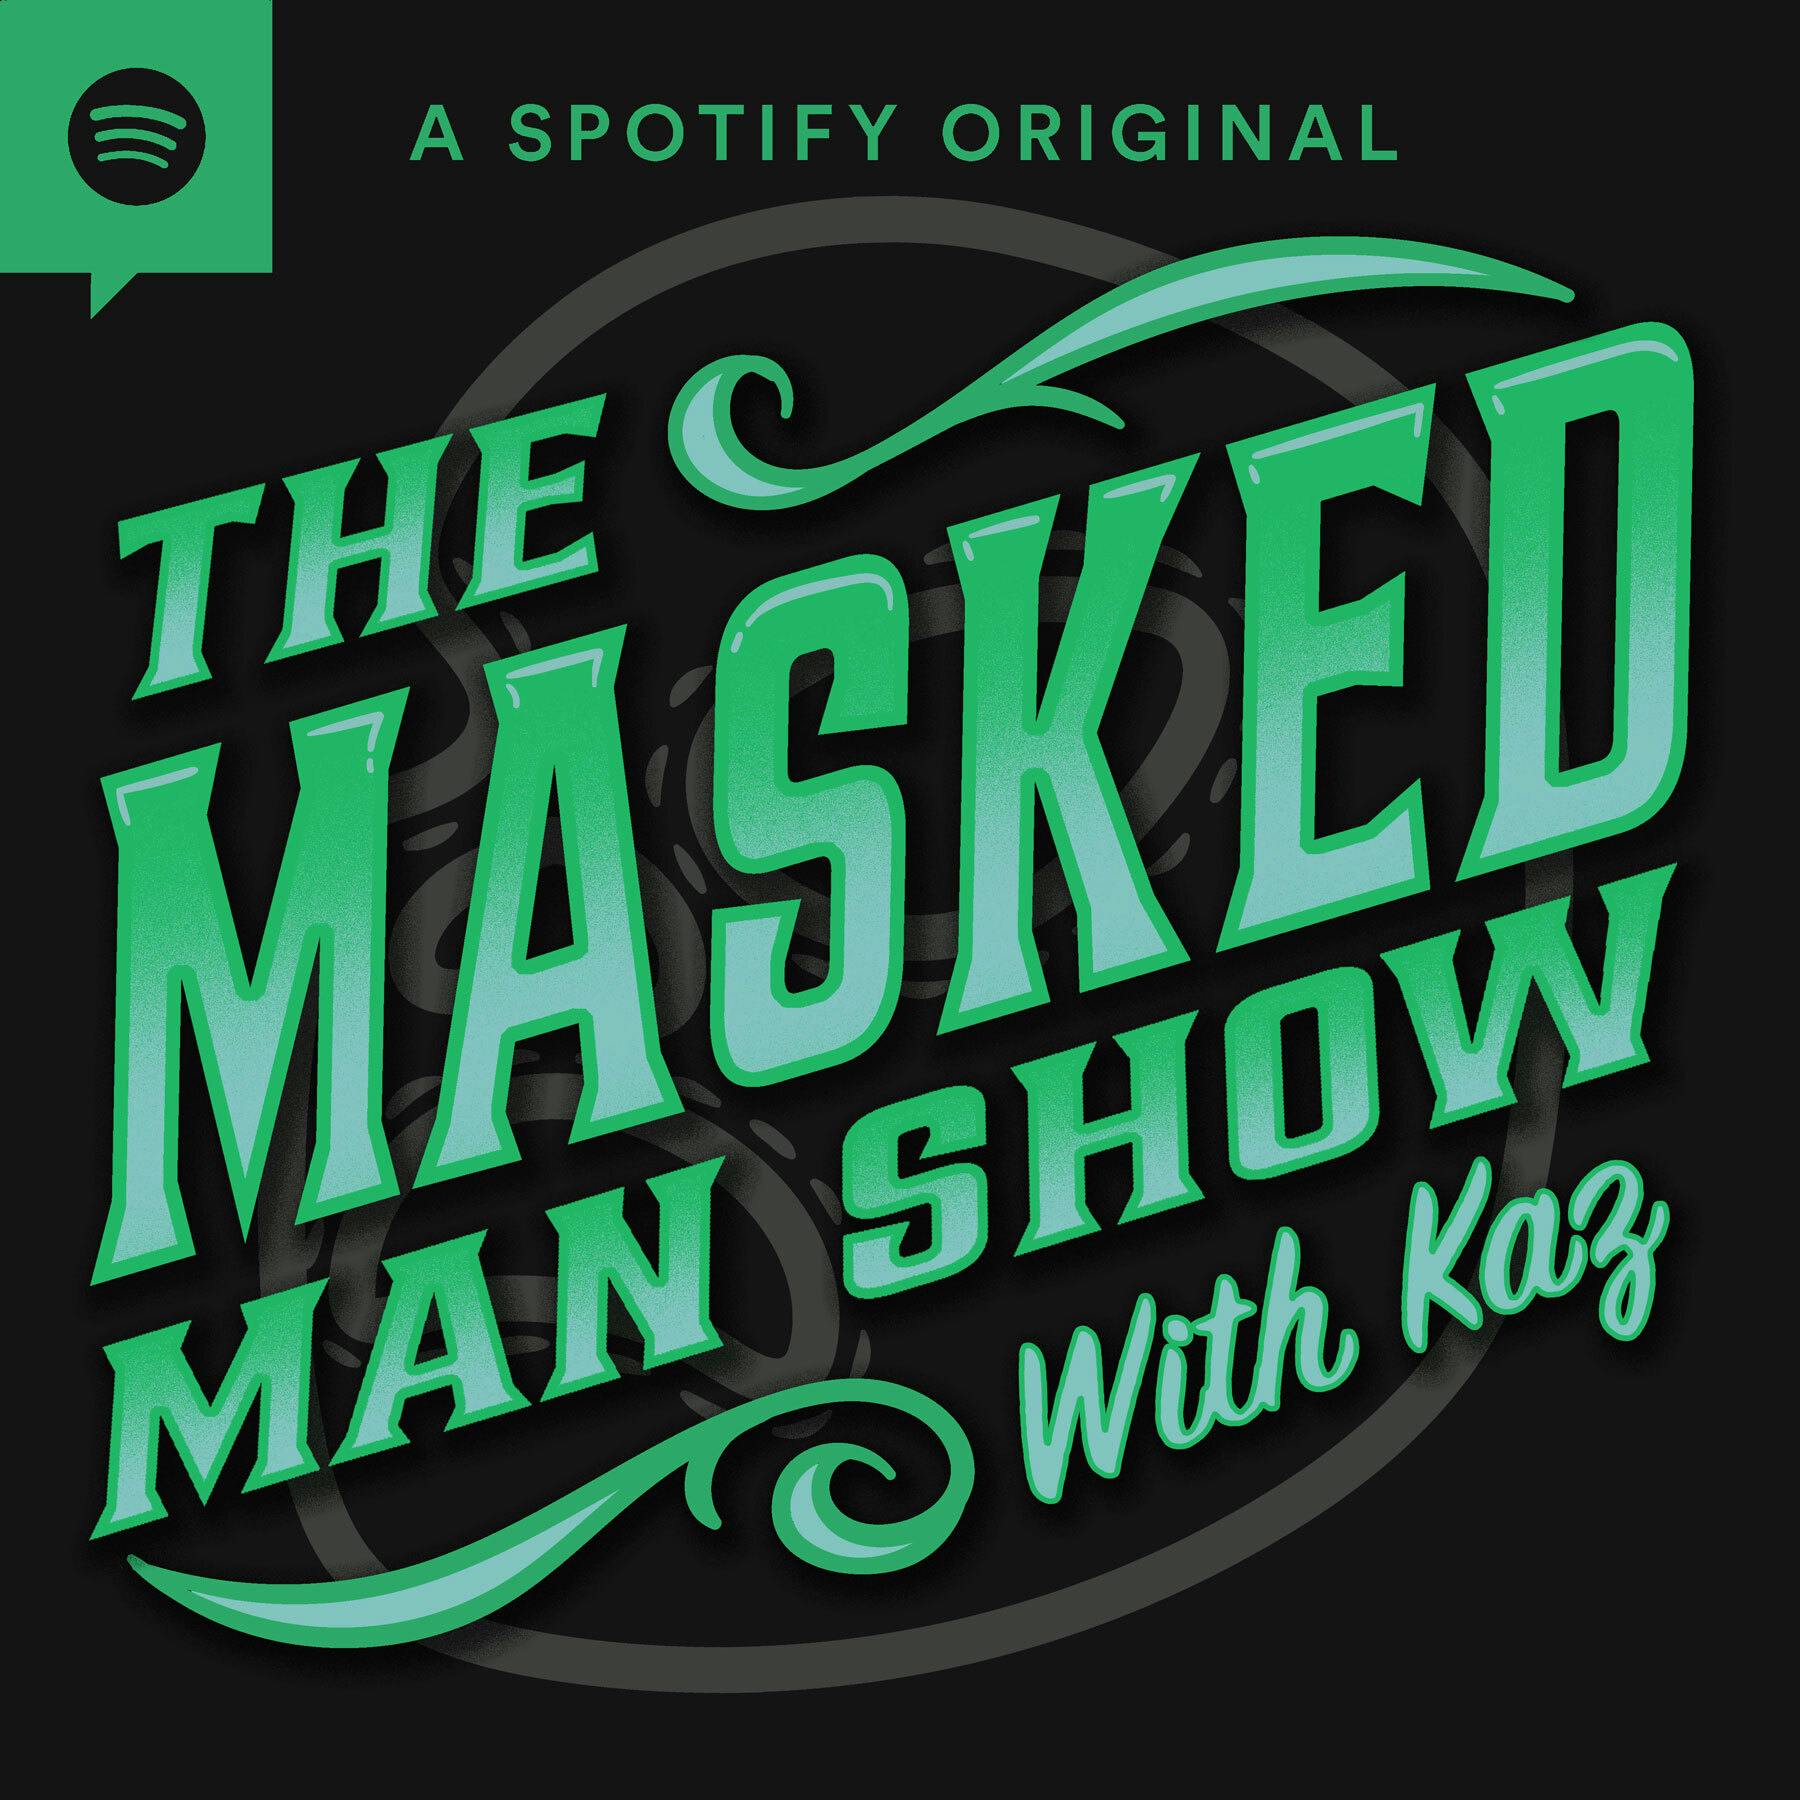 YEET Mondays Are Back! Plus, WWE U.S. Title Tournament Preview. | The Masked Man Show